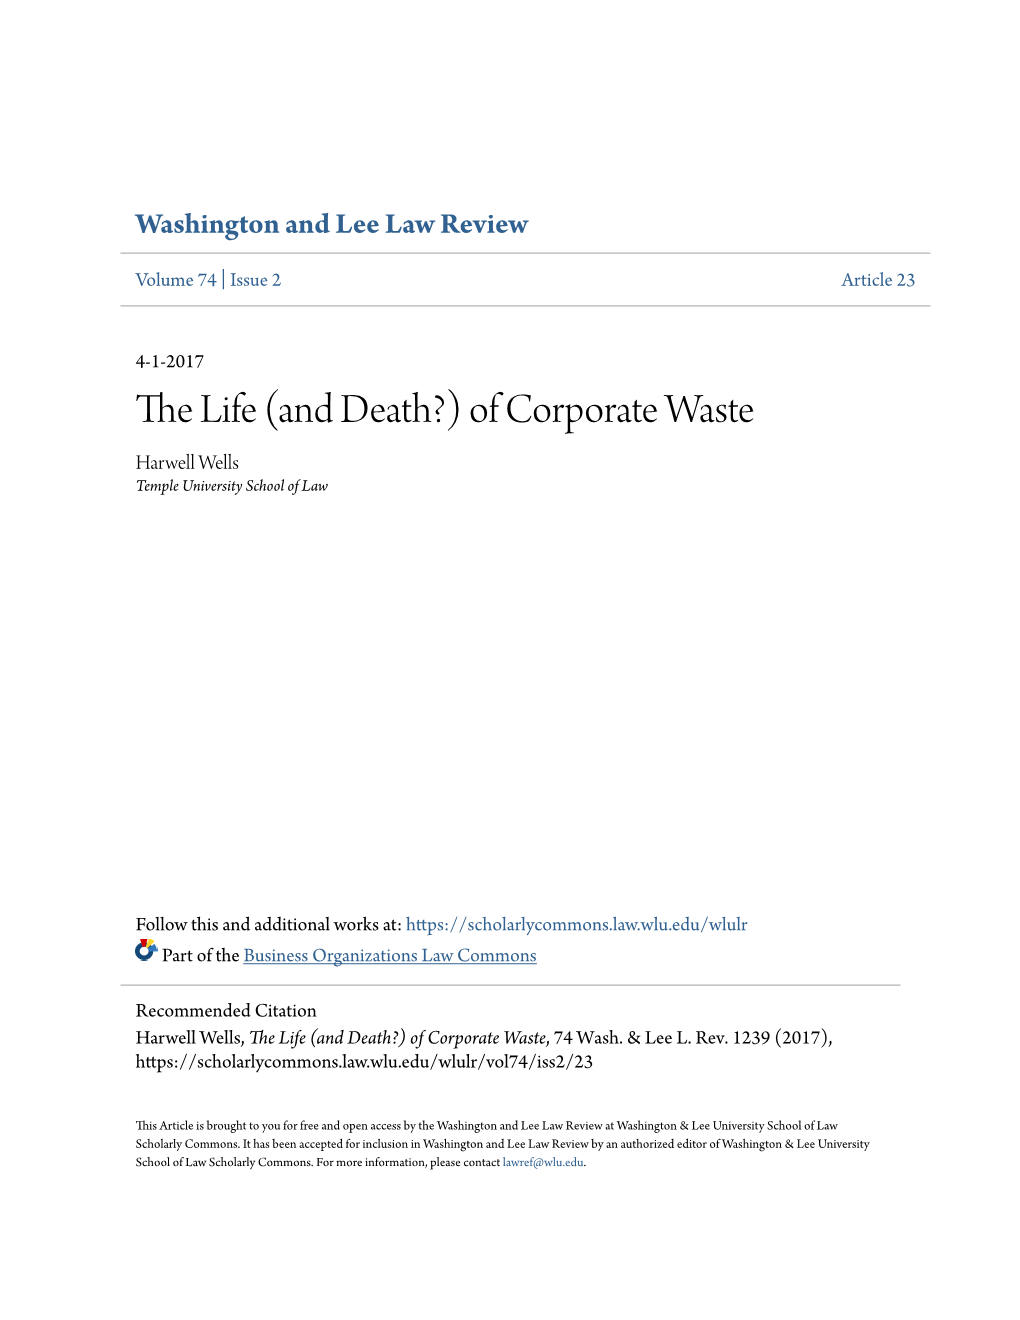 The Life (And Death?) of Corporate Waste Harwell Wells Temple University School of Law